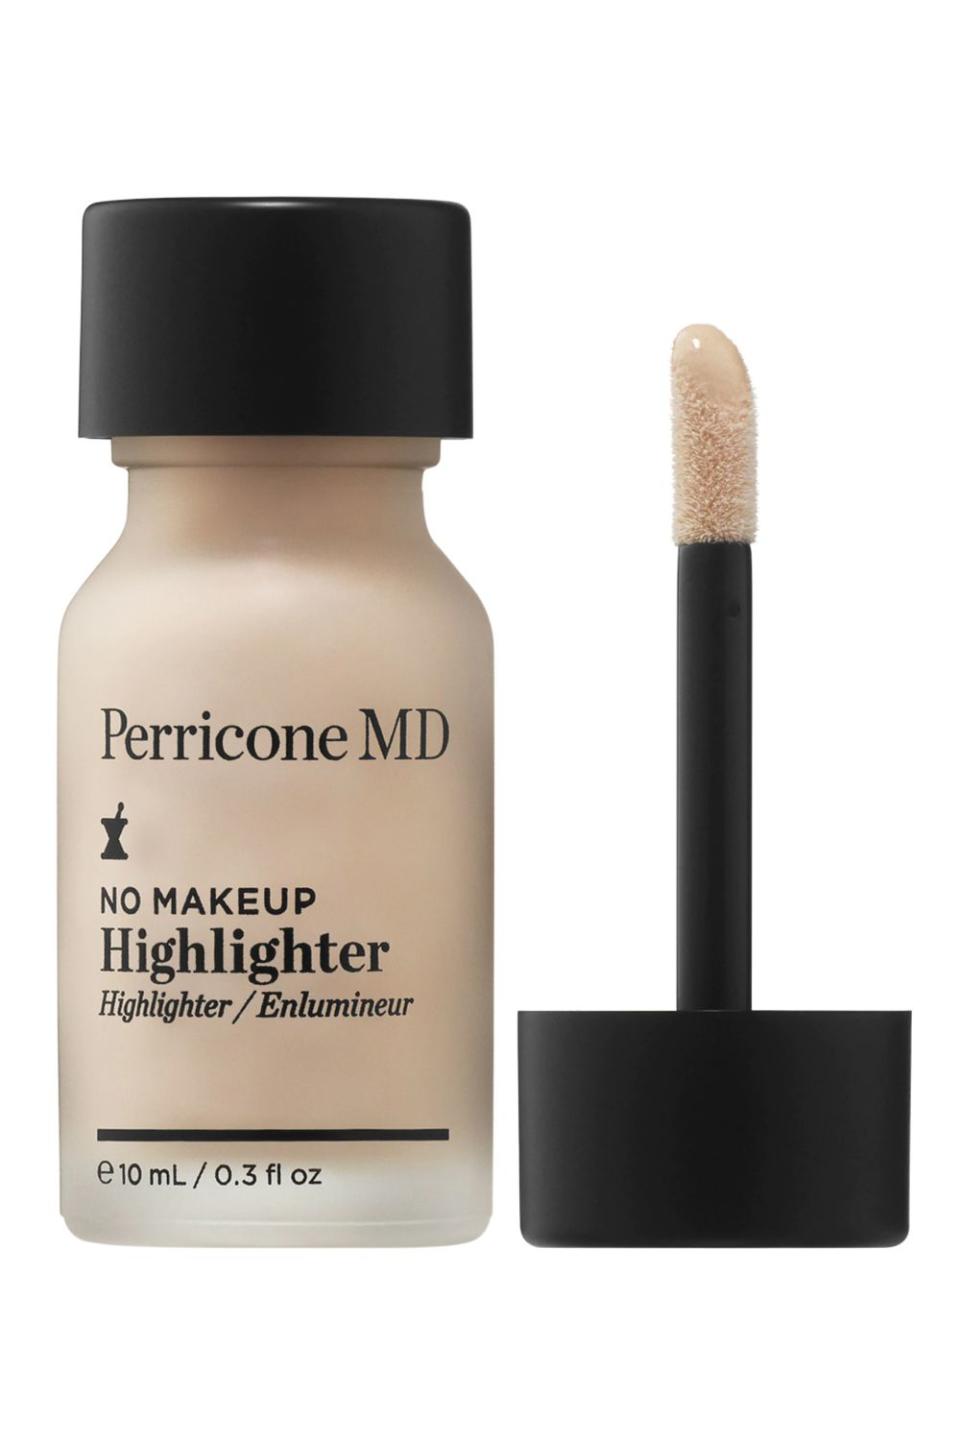 5) Perricone MD No Makeup Highlighter